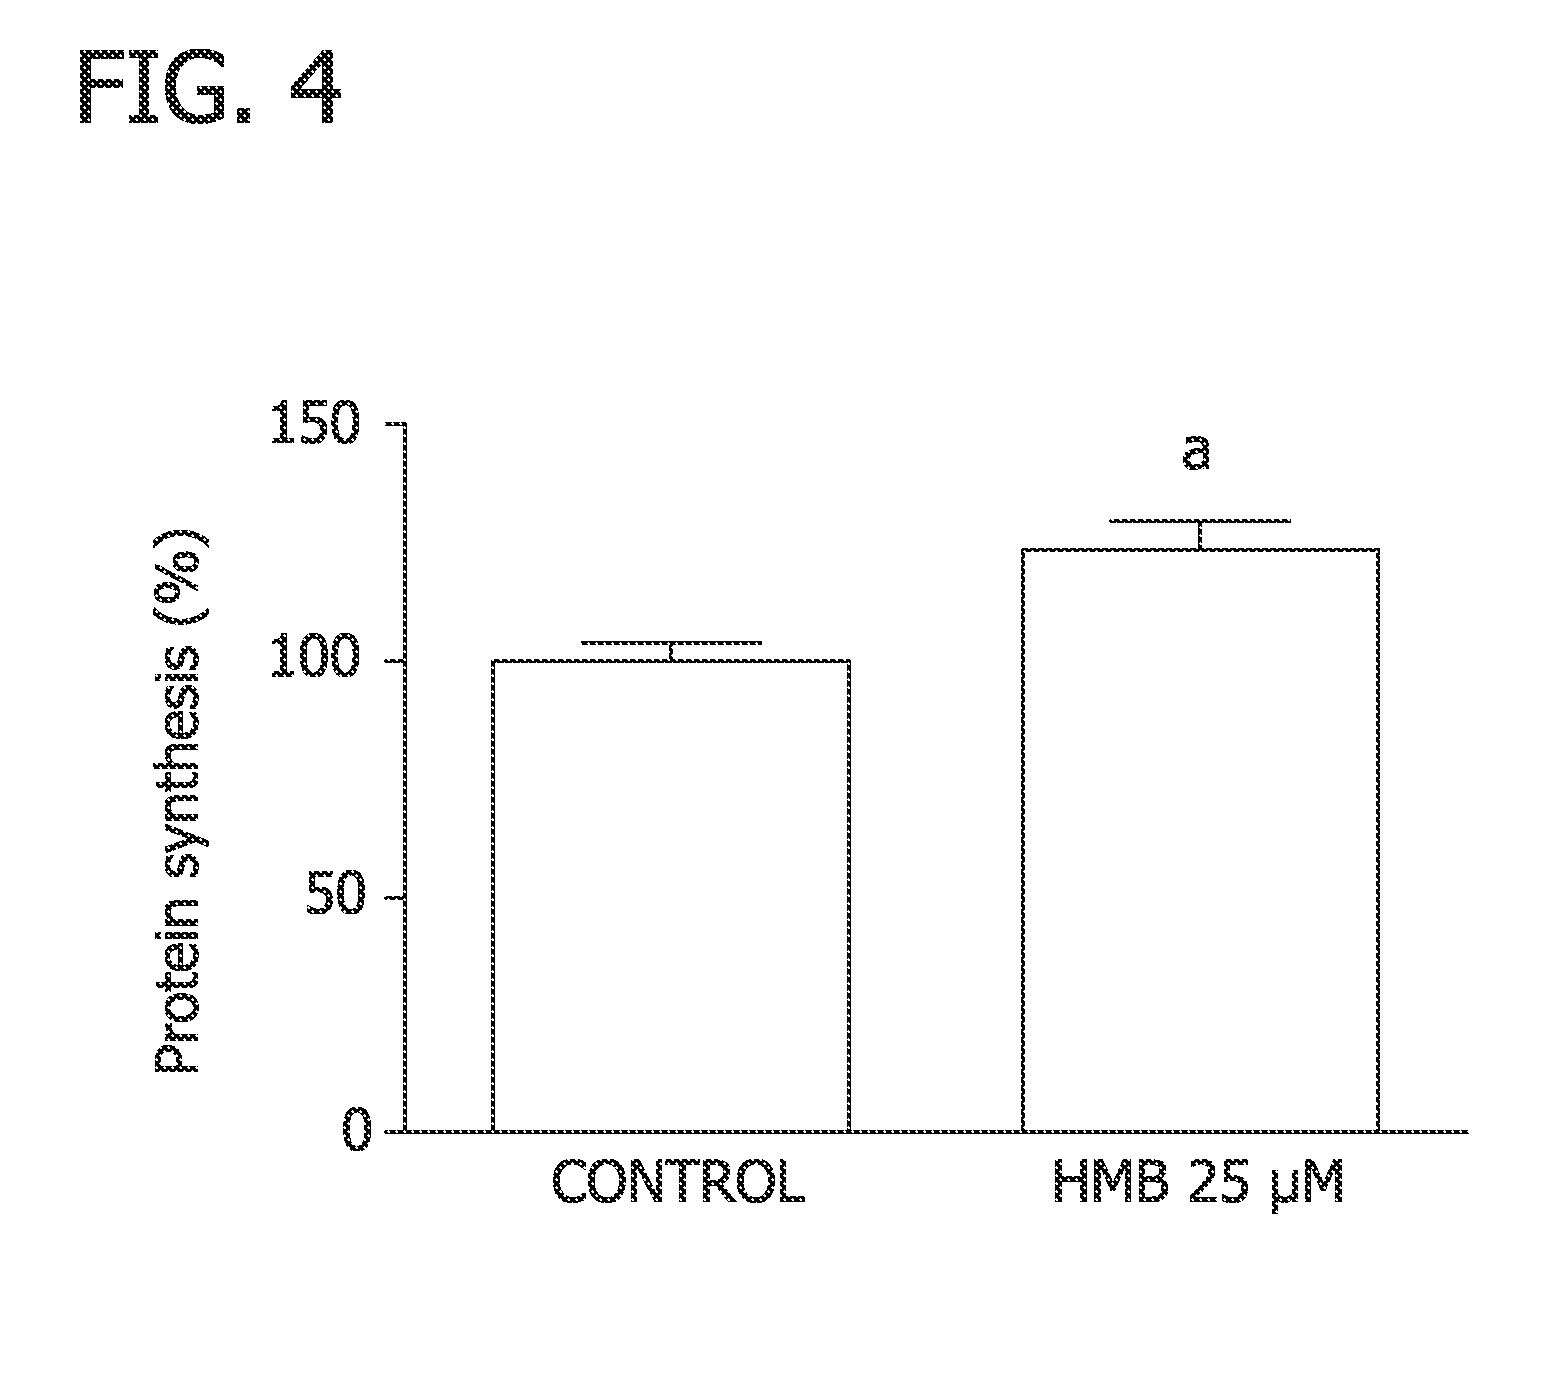 Methods for improving brain development and cognitive function using beta-hydroxy-beta methylbutyrate